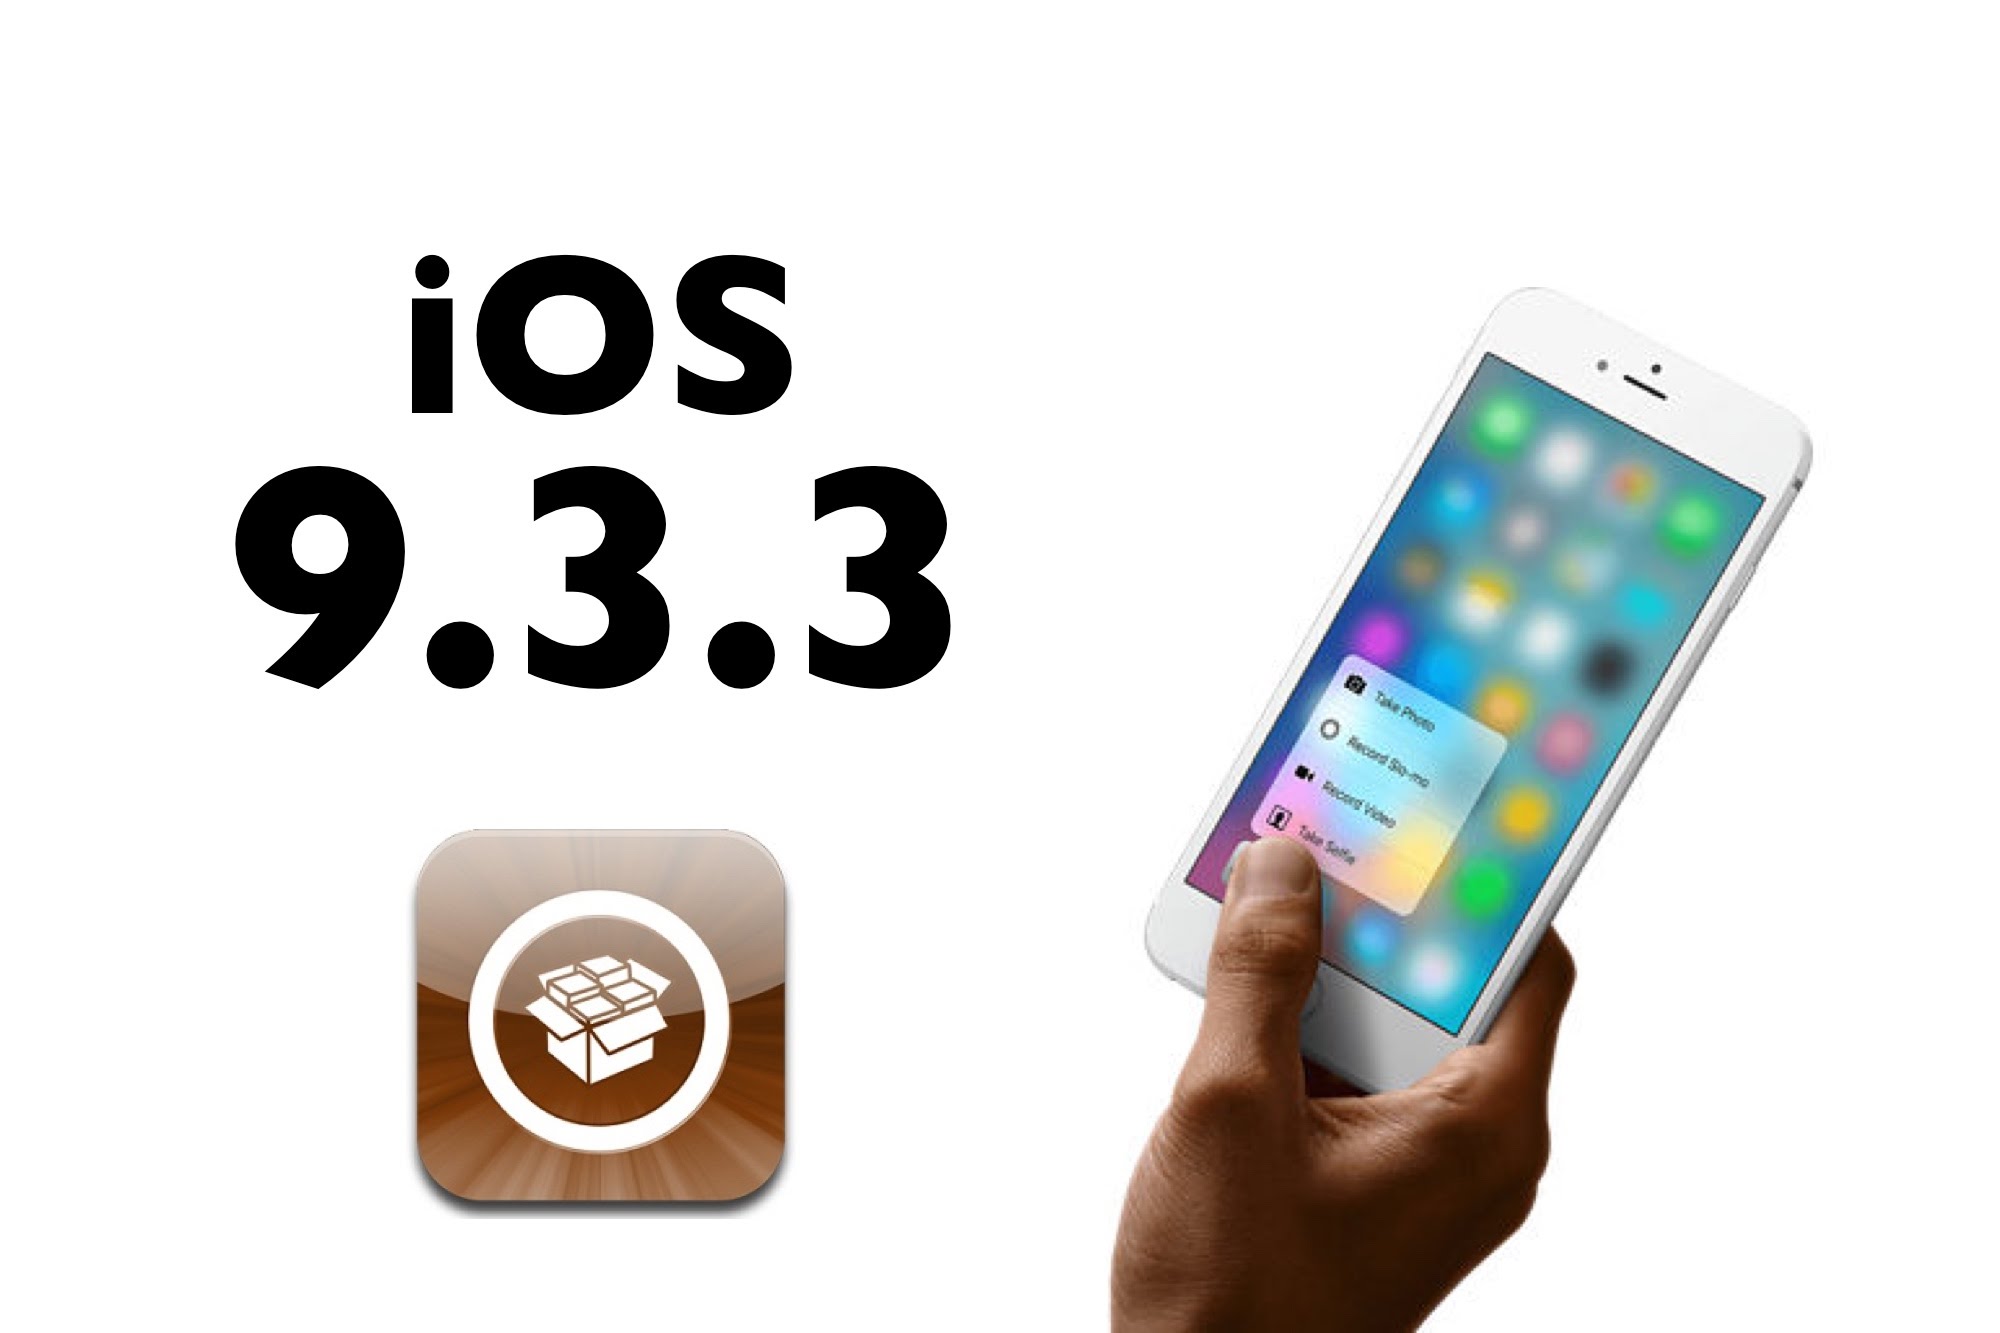 download the new version for ios Image Tuner Pro 9.9